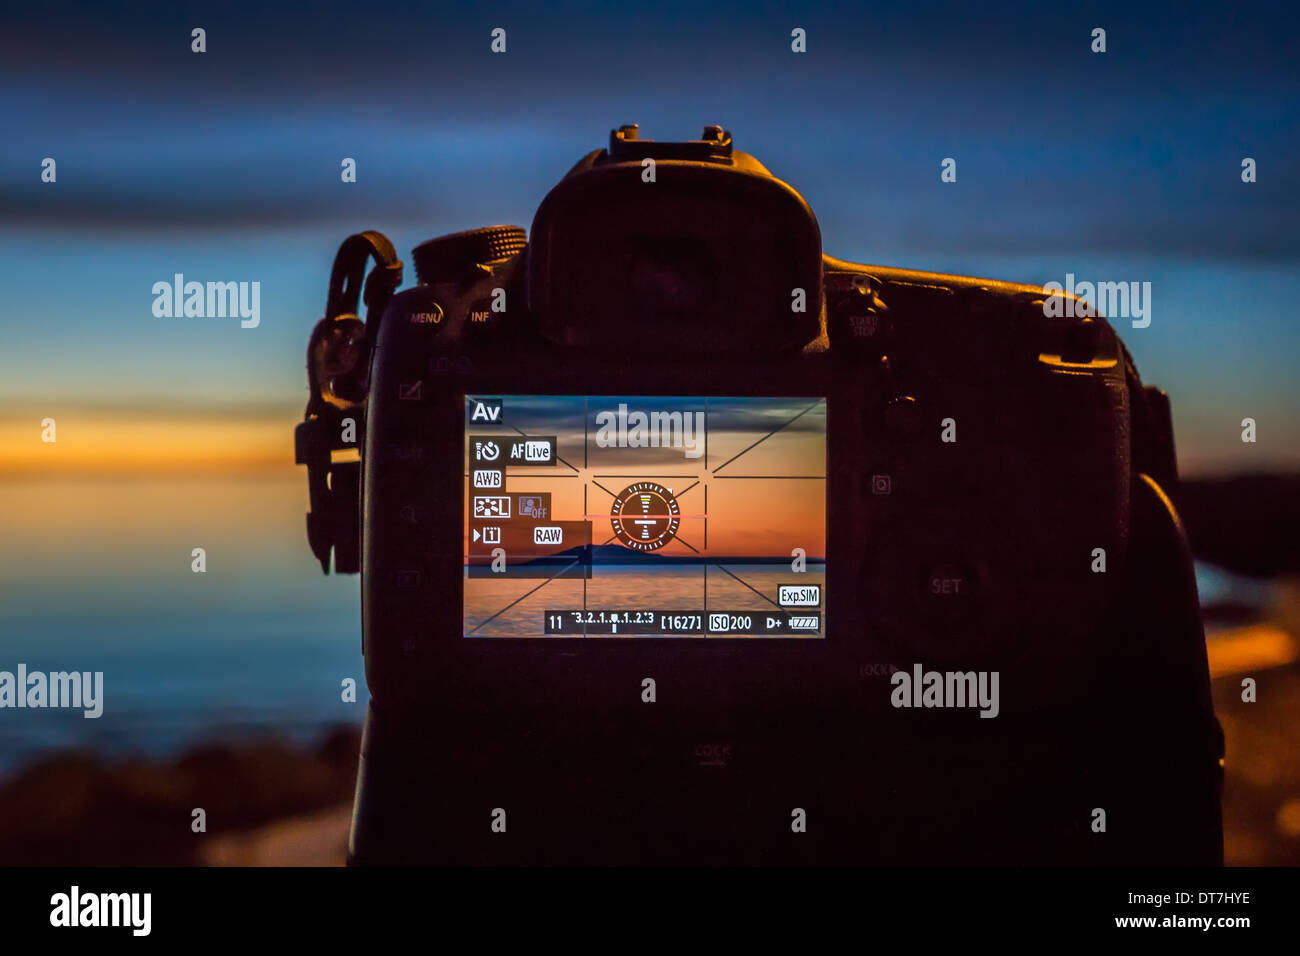 DSLR camera back with sunset image on the screen. Canon EOS 5D Mark III. Stock Photo